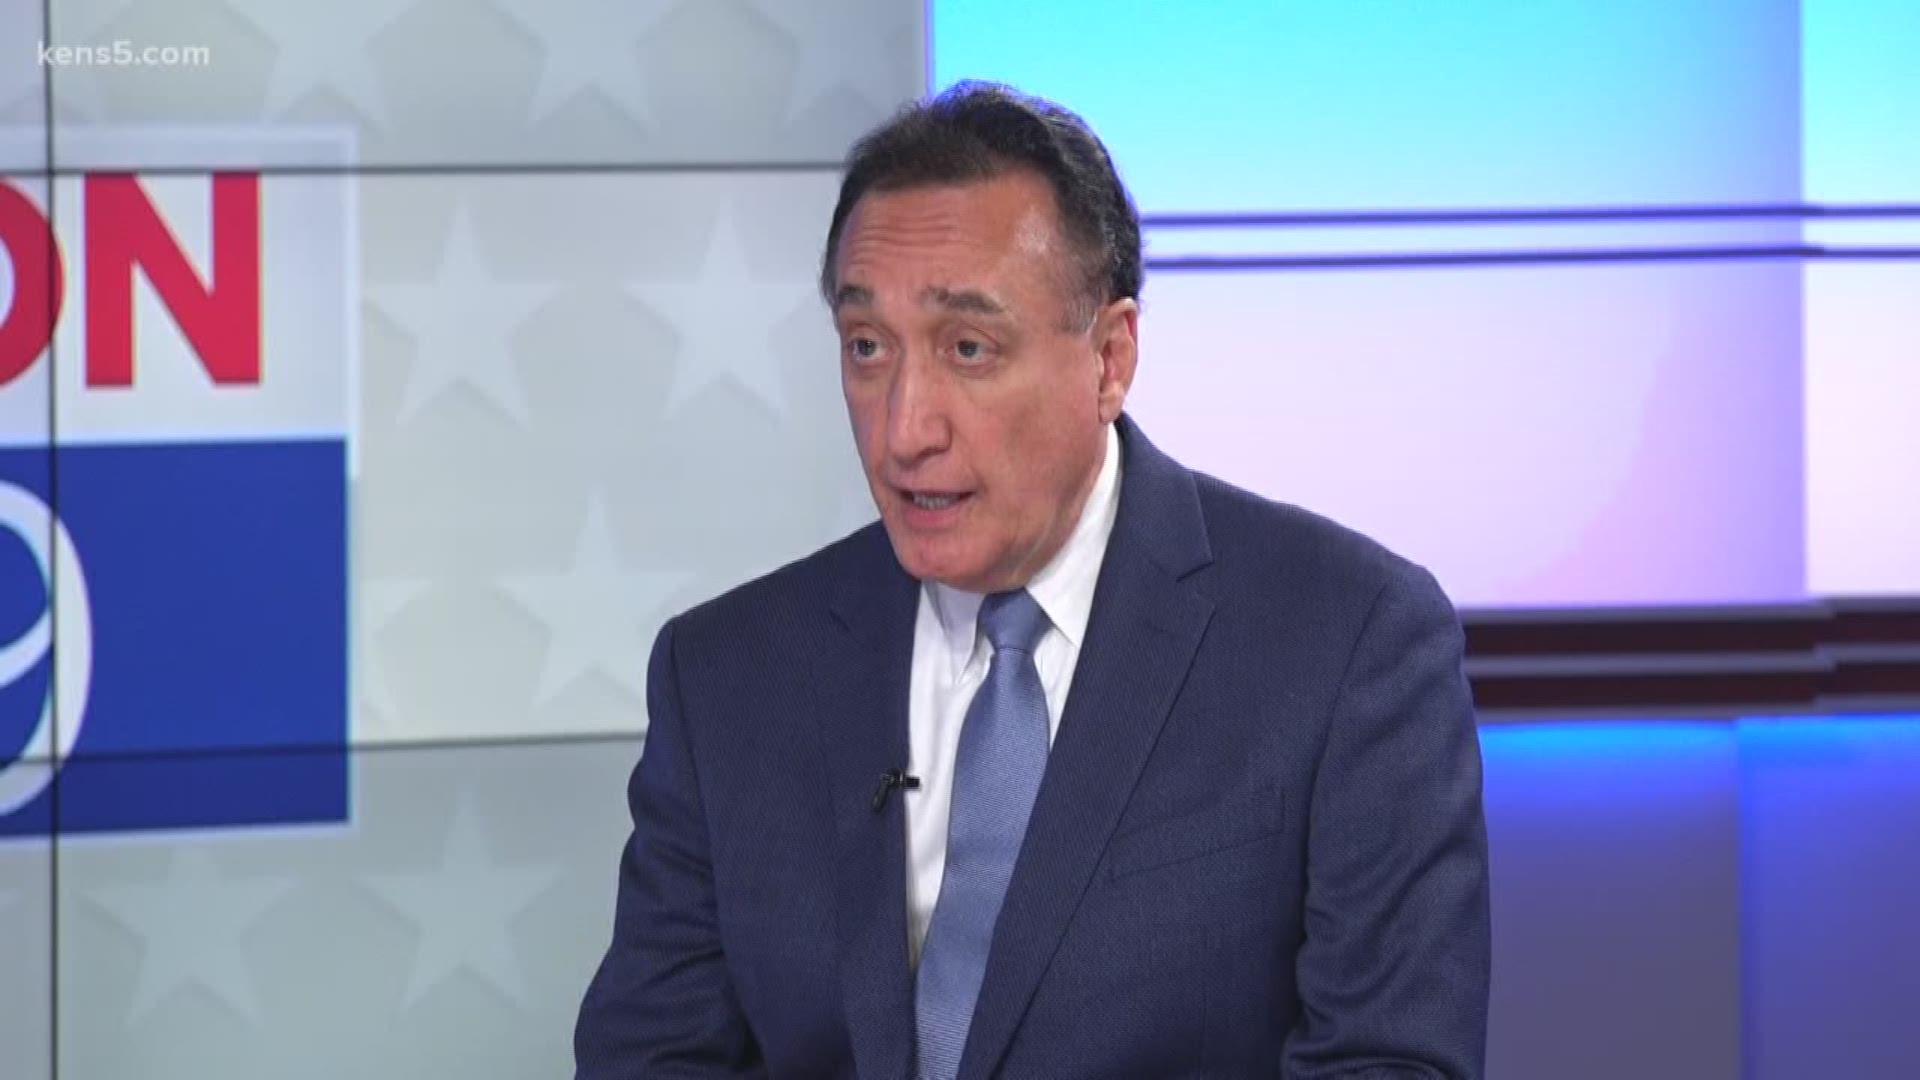 Henry Cisneros visited the KENS 5 Studios on Election Day to discuss the factors resulting in Saturday's outcome.